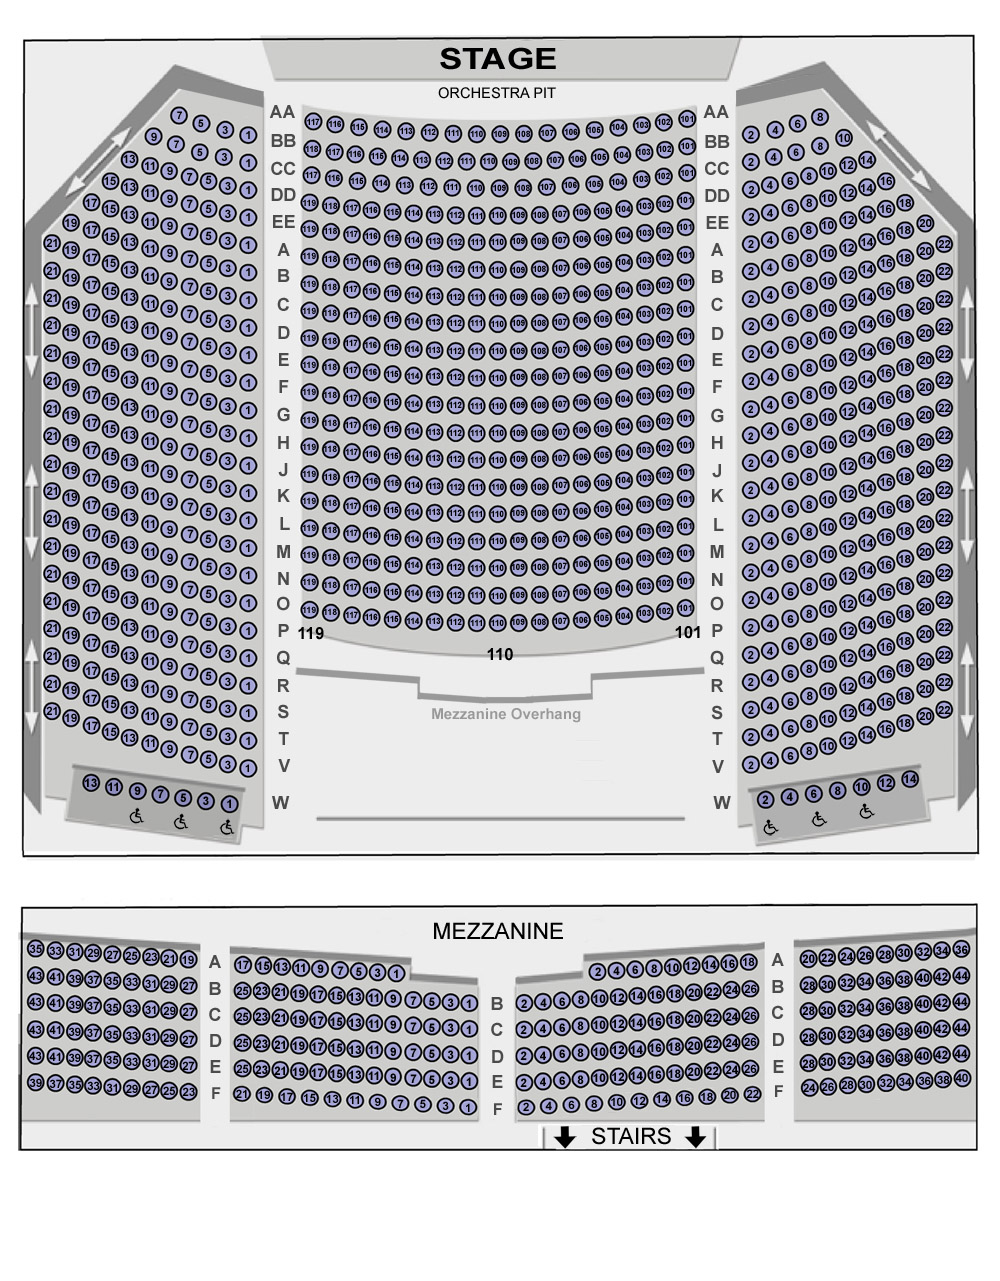 Chevrolet Theater Seating Chart